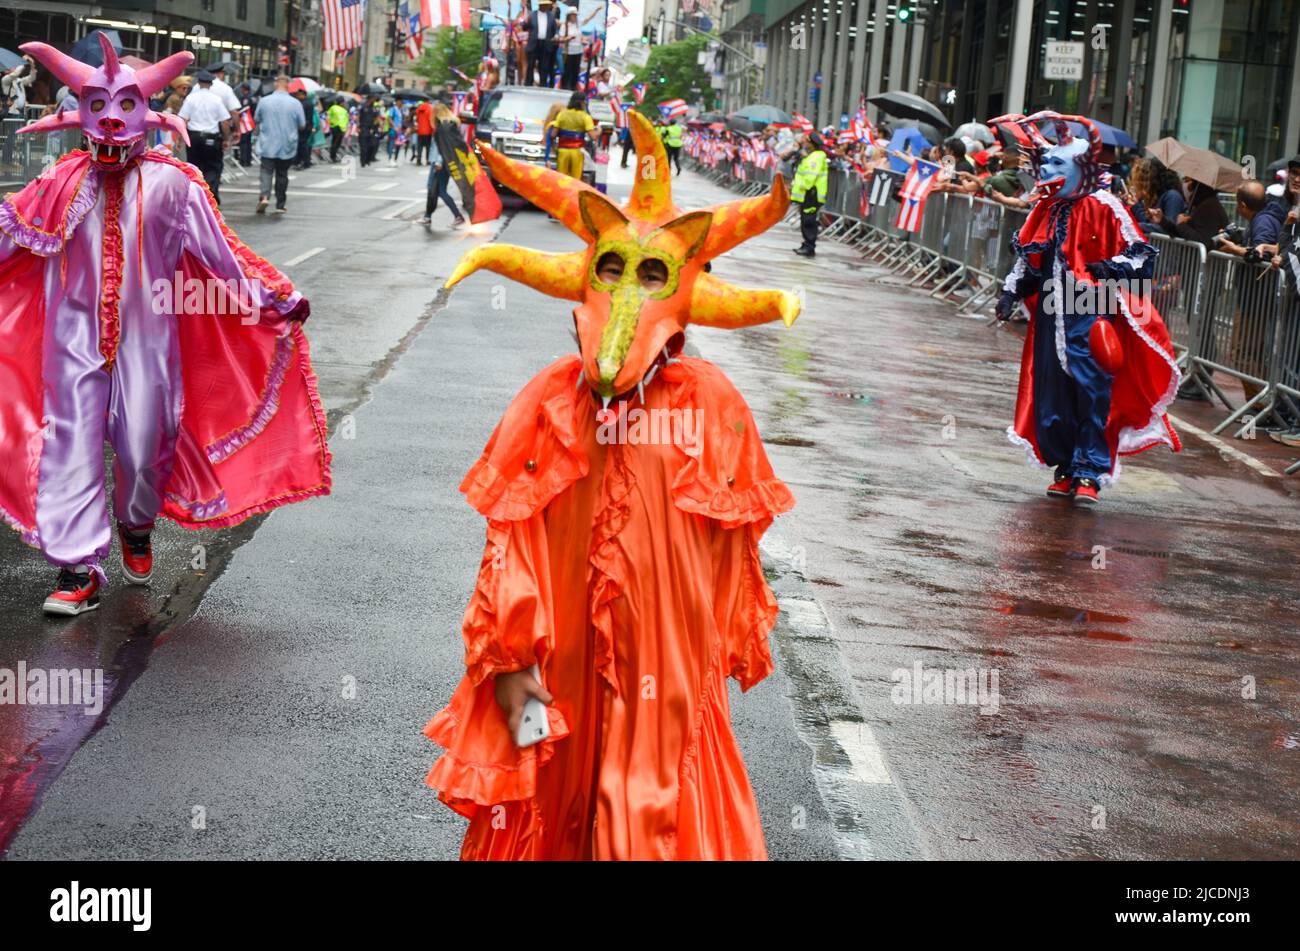 Participants  are seen  wearing traditional costume on Fifth Avenue in New York City during the National Puerto Rican Day Parade, returning after a tw Stock Photo